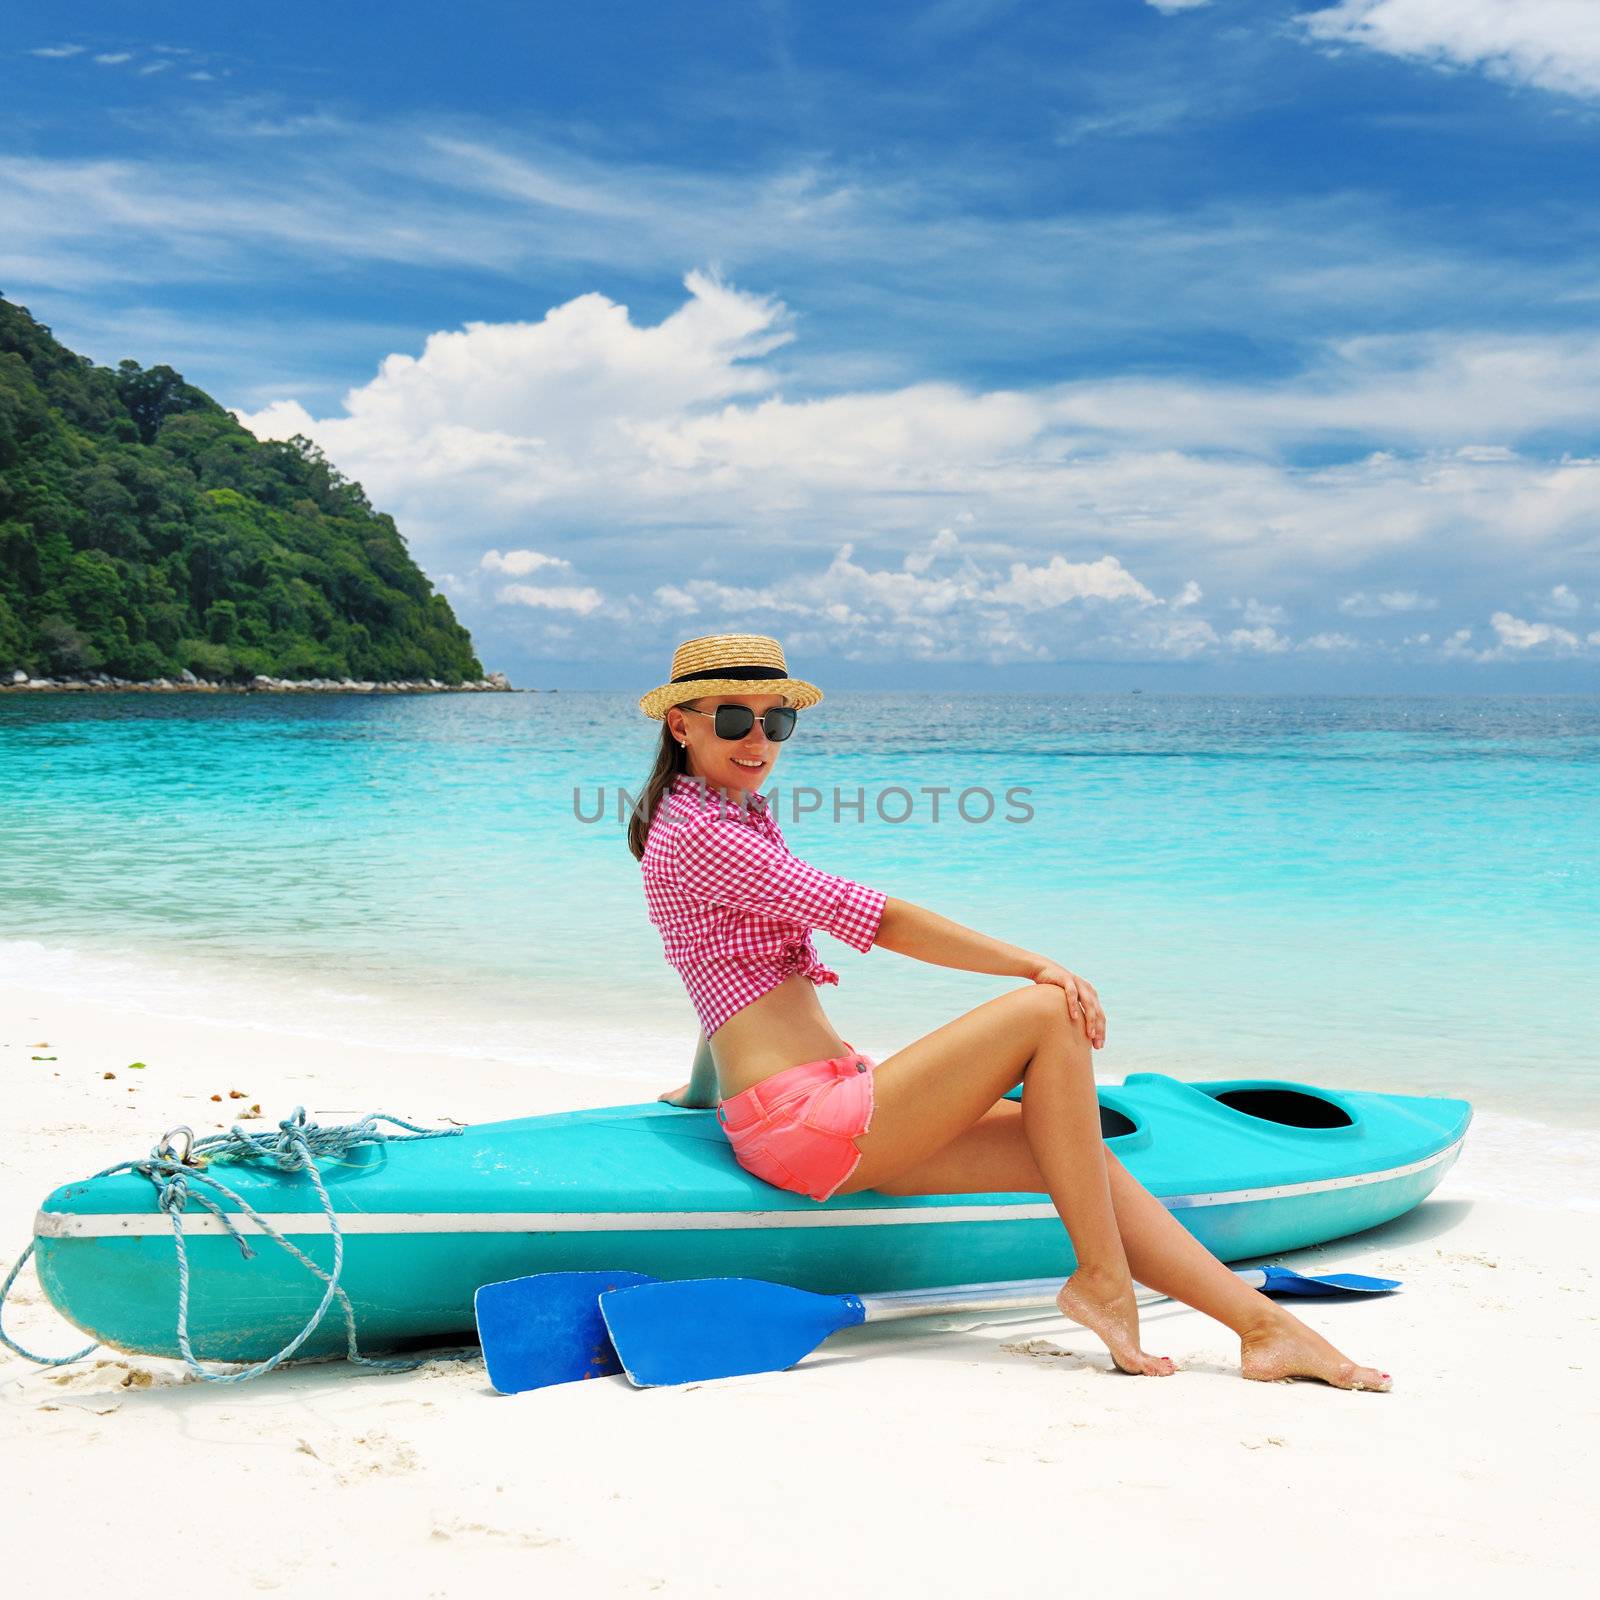 Woman in sunglasses at beach by haveseen